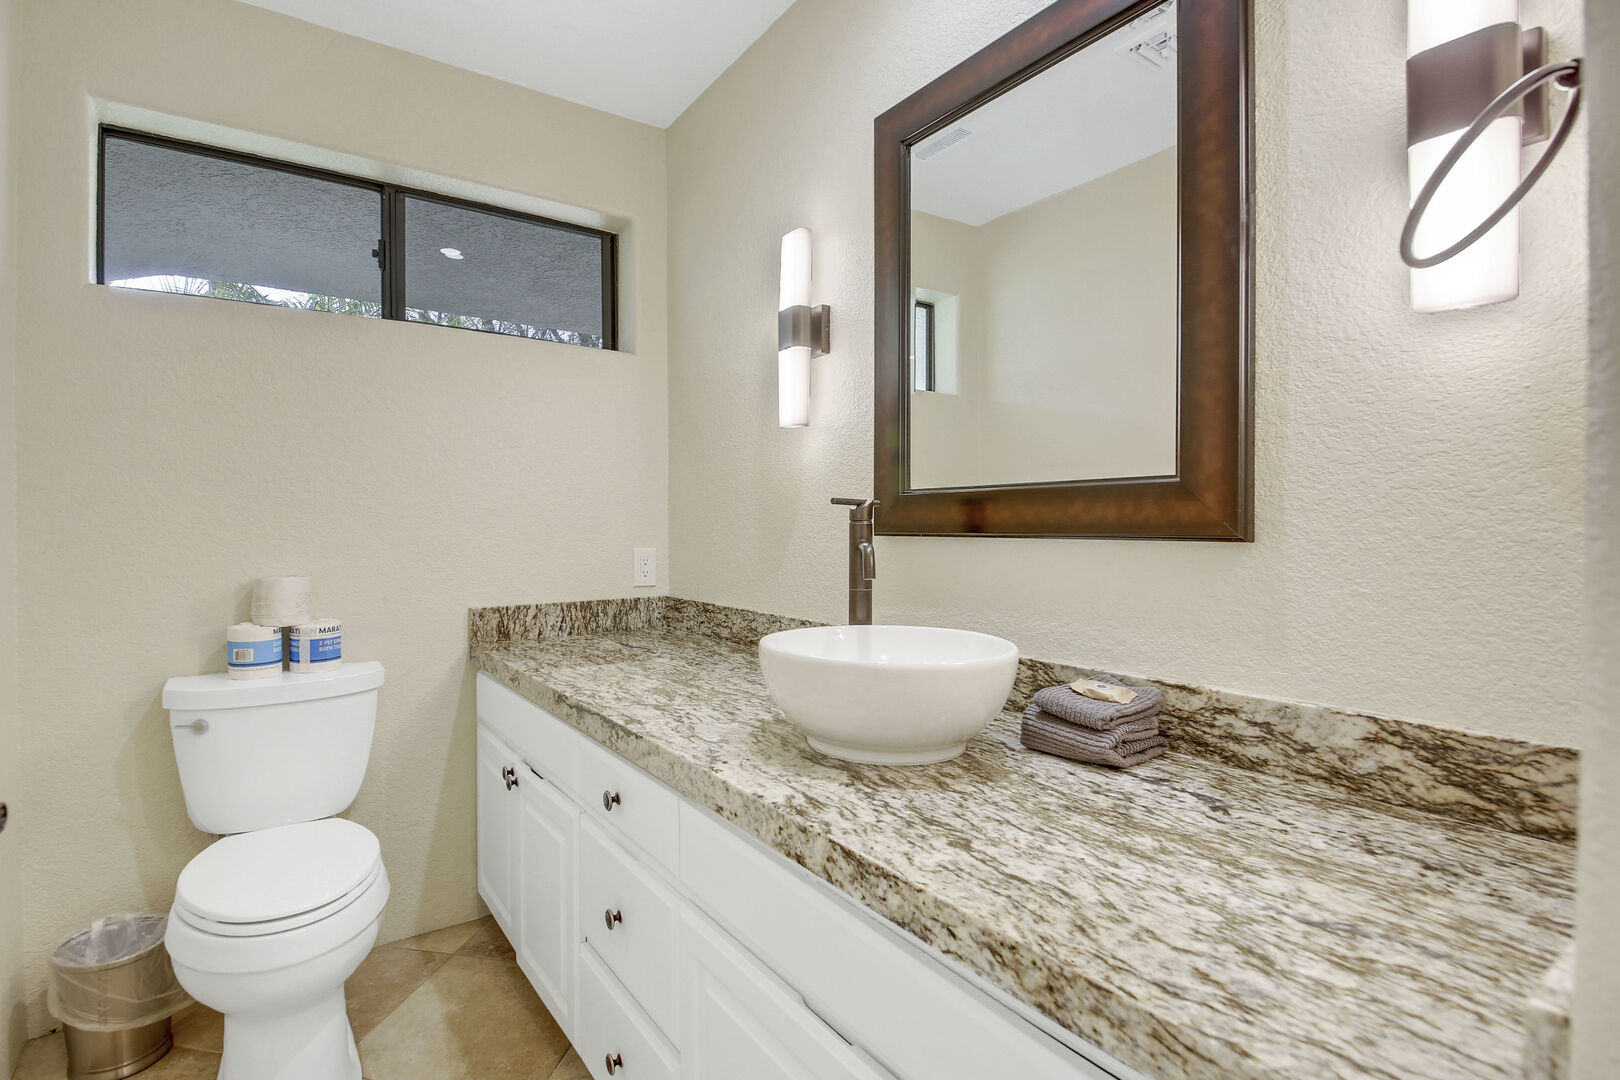 The powder room is located next to the front entry and features a vanity sink.